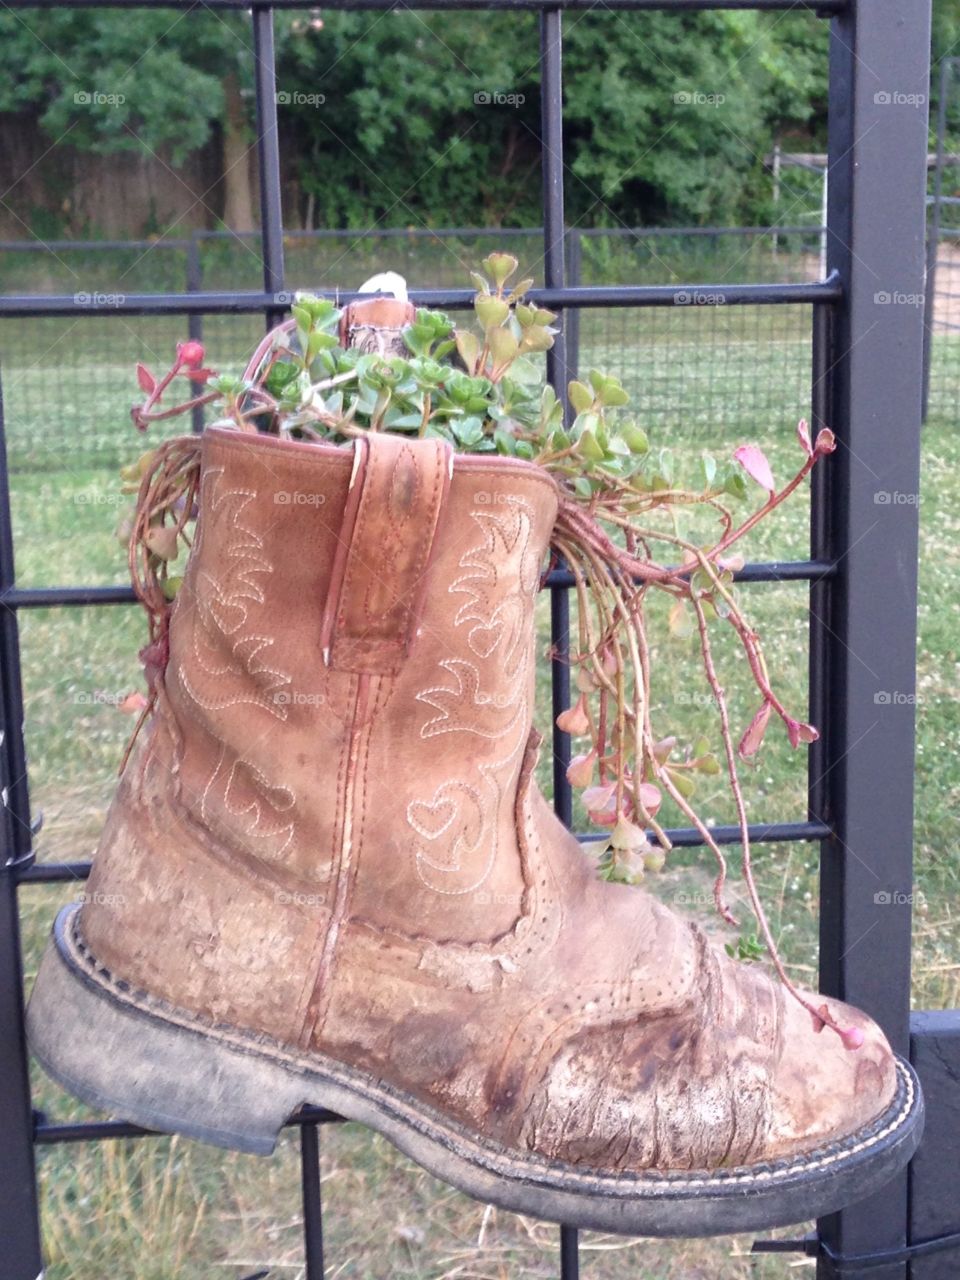 Brown leather boot with plant hanging from fence